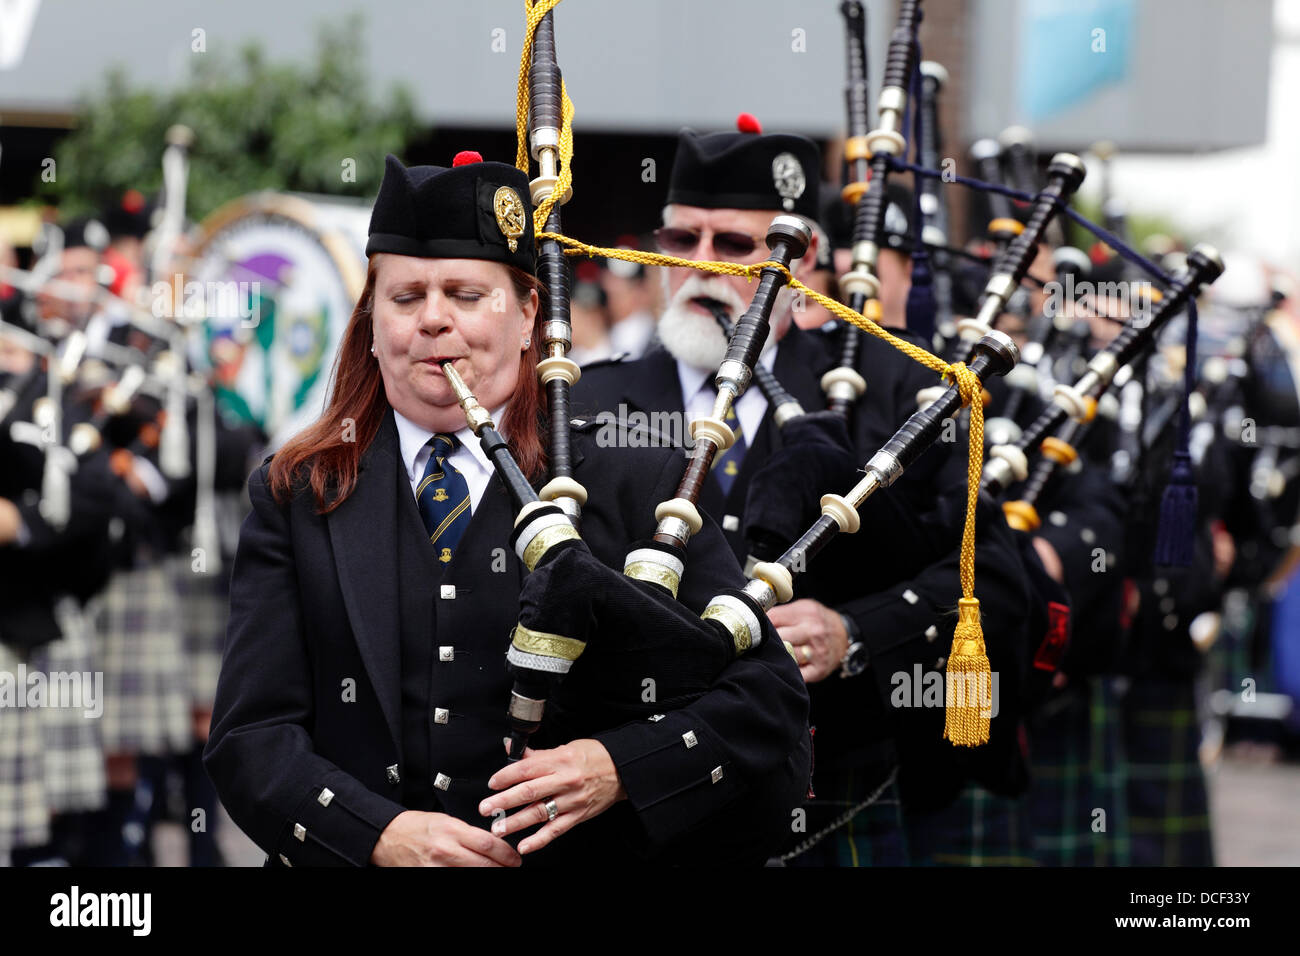 Saint Enoch Square, Glasgow, Scotland, UK, Friday, 16th August, 2013. Pipe Major Bethany Bisaillion leads Sons Of Scotland Pipe Band from Ottawa, Canada as four pipe bands take part in the traditional Beat The Retreat during the Piping Live! Festival. Stock Photo